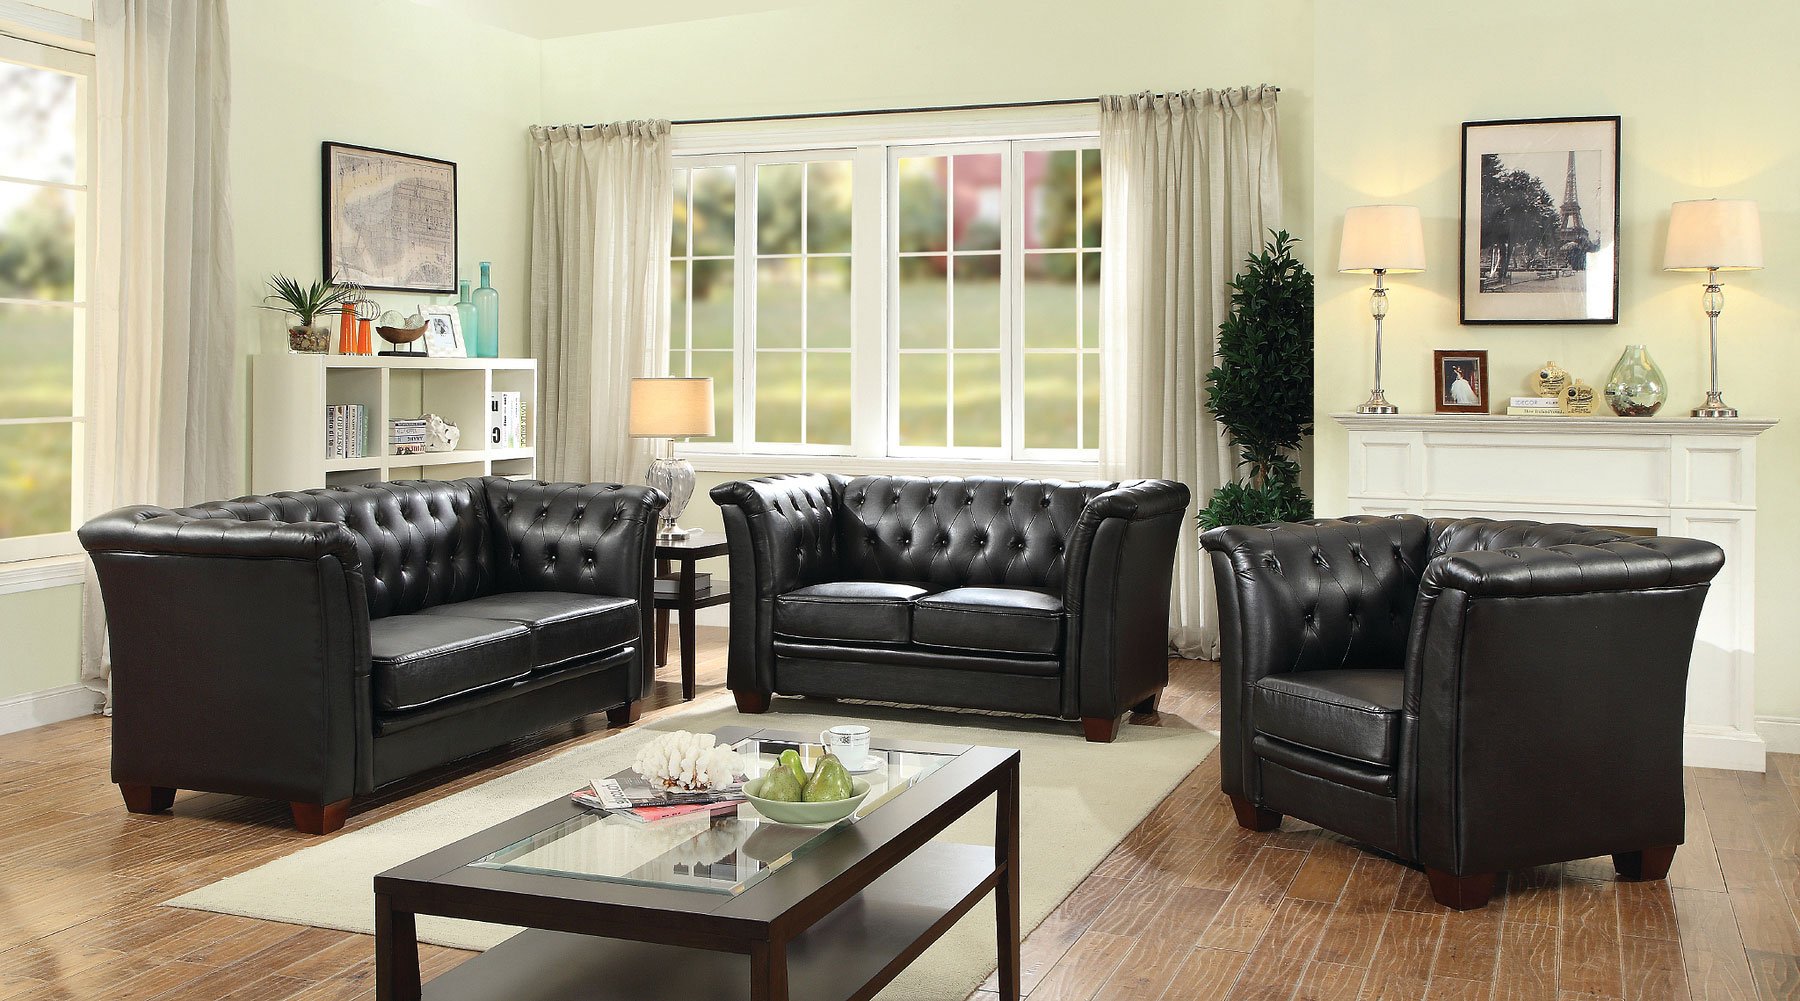 G323 Tufted Living Room Set (Black) by Glory Furniture